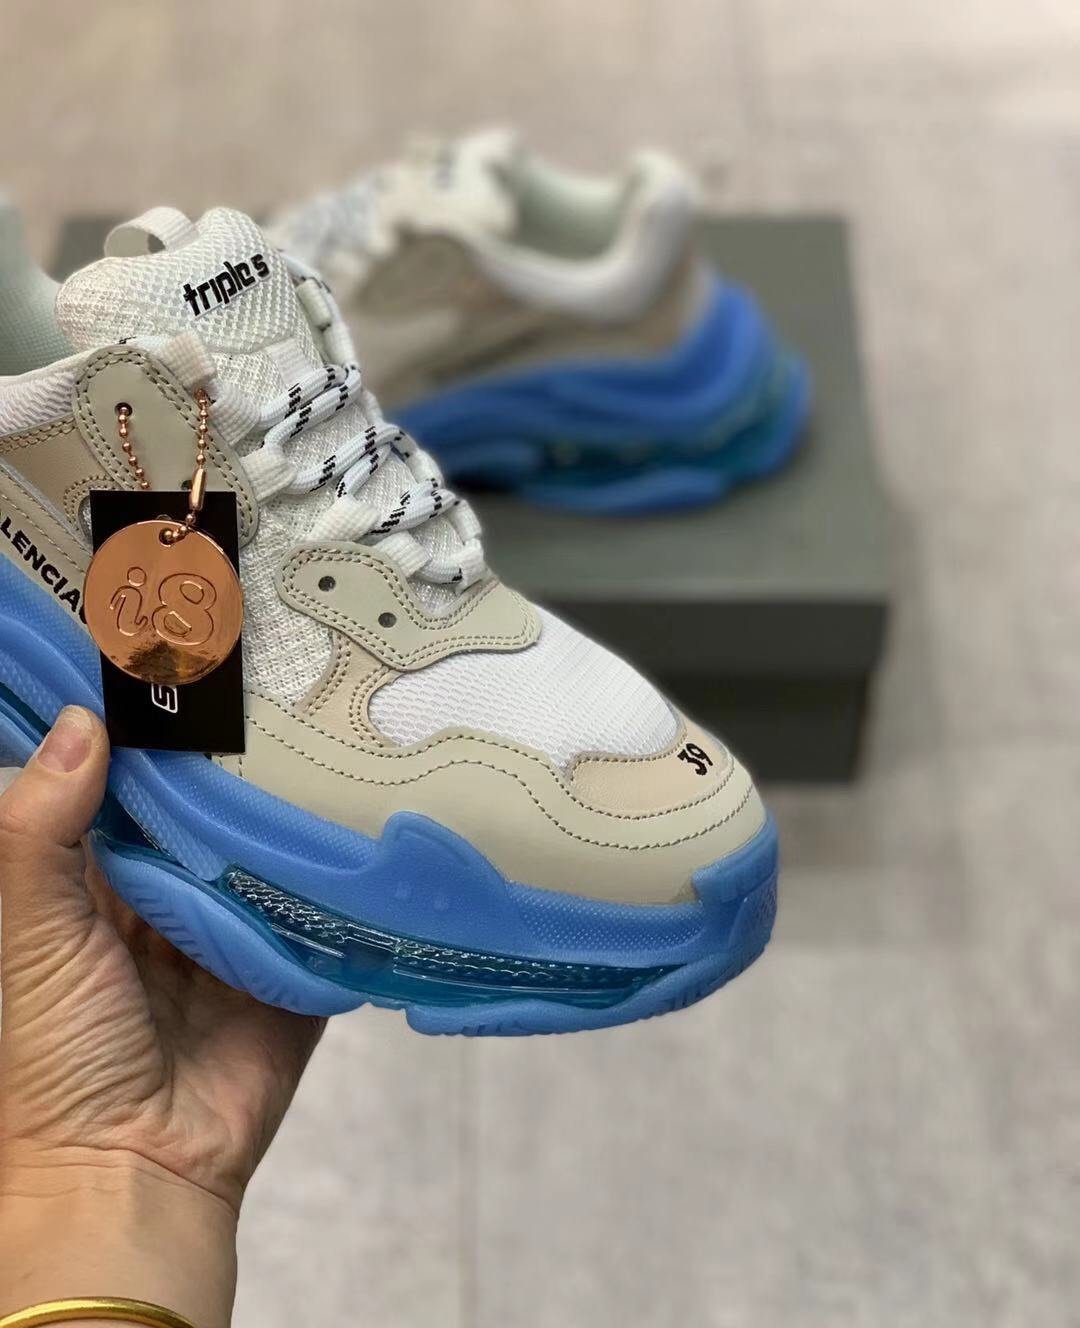 SNBAL  Triple S Sneakers Blue White Clear Sole